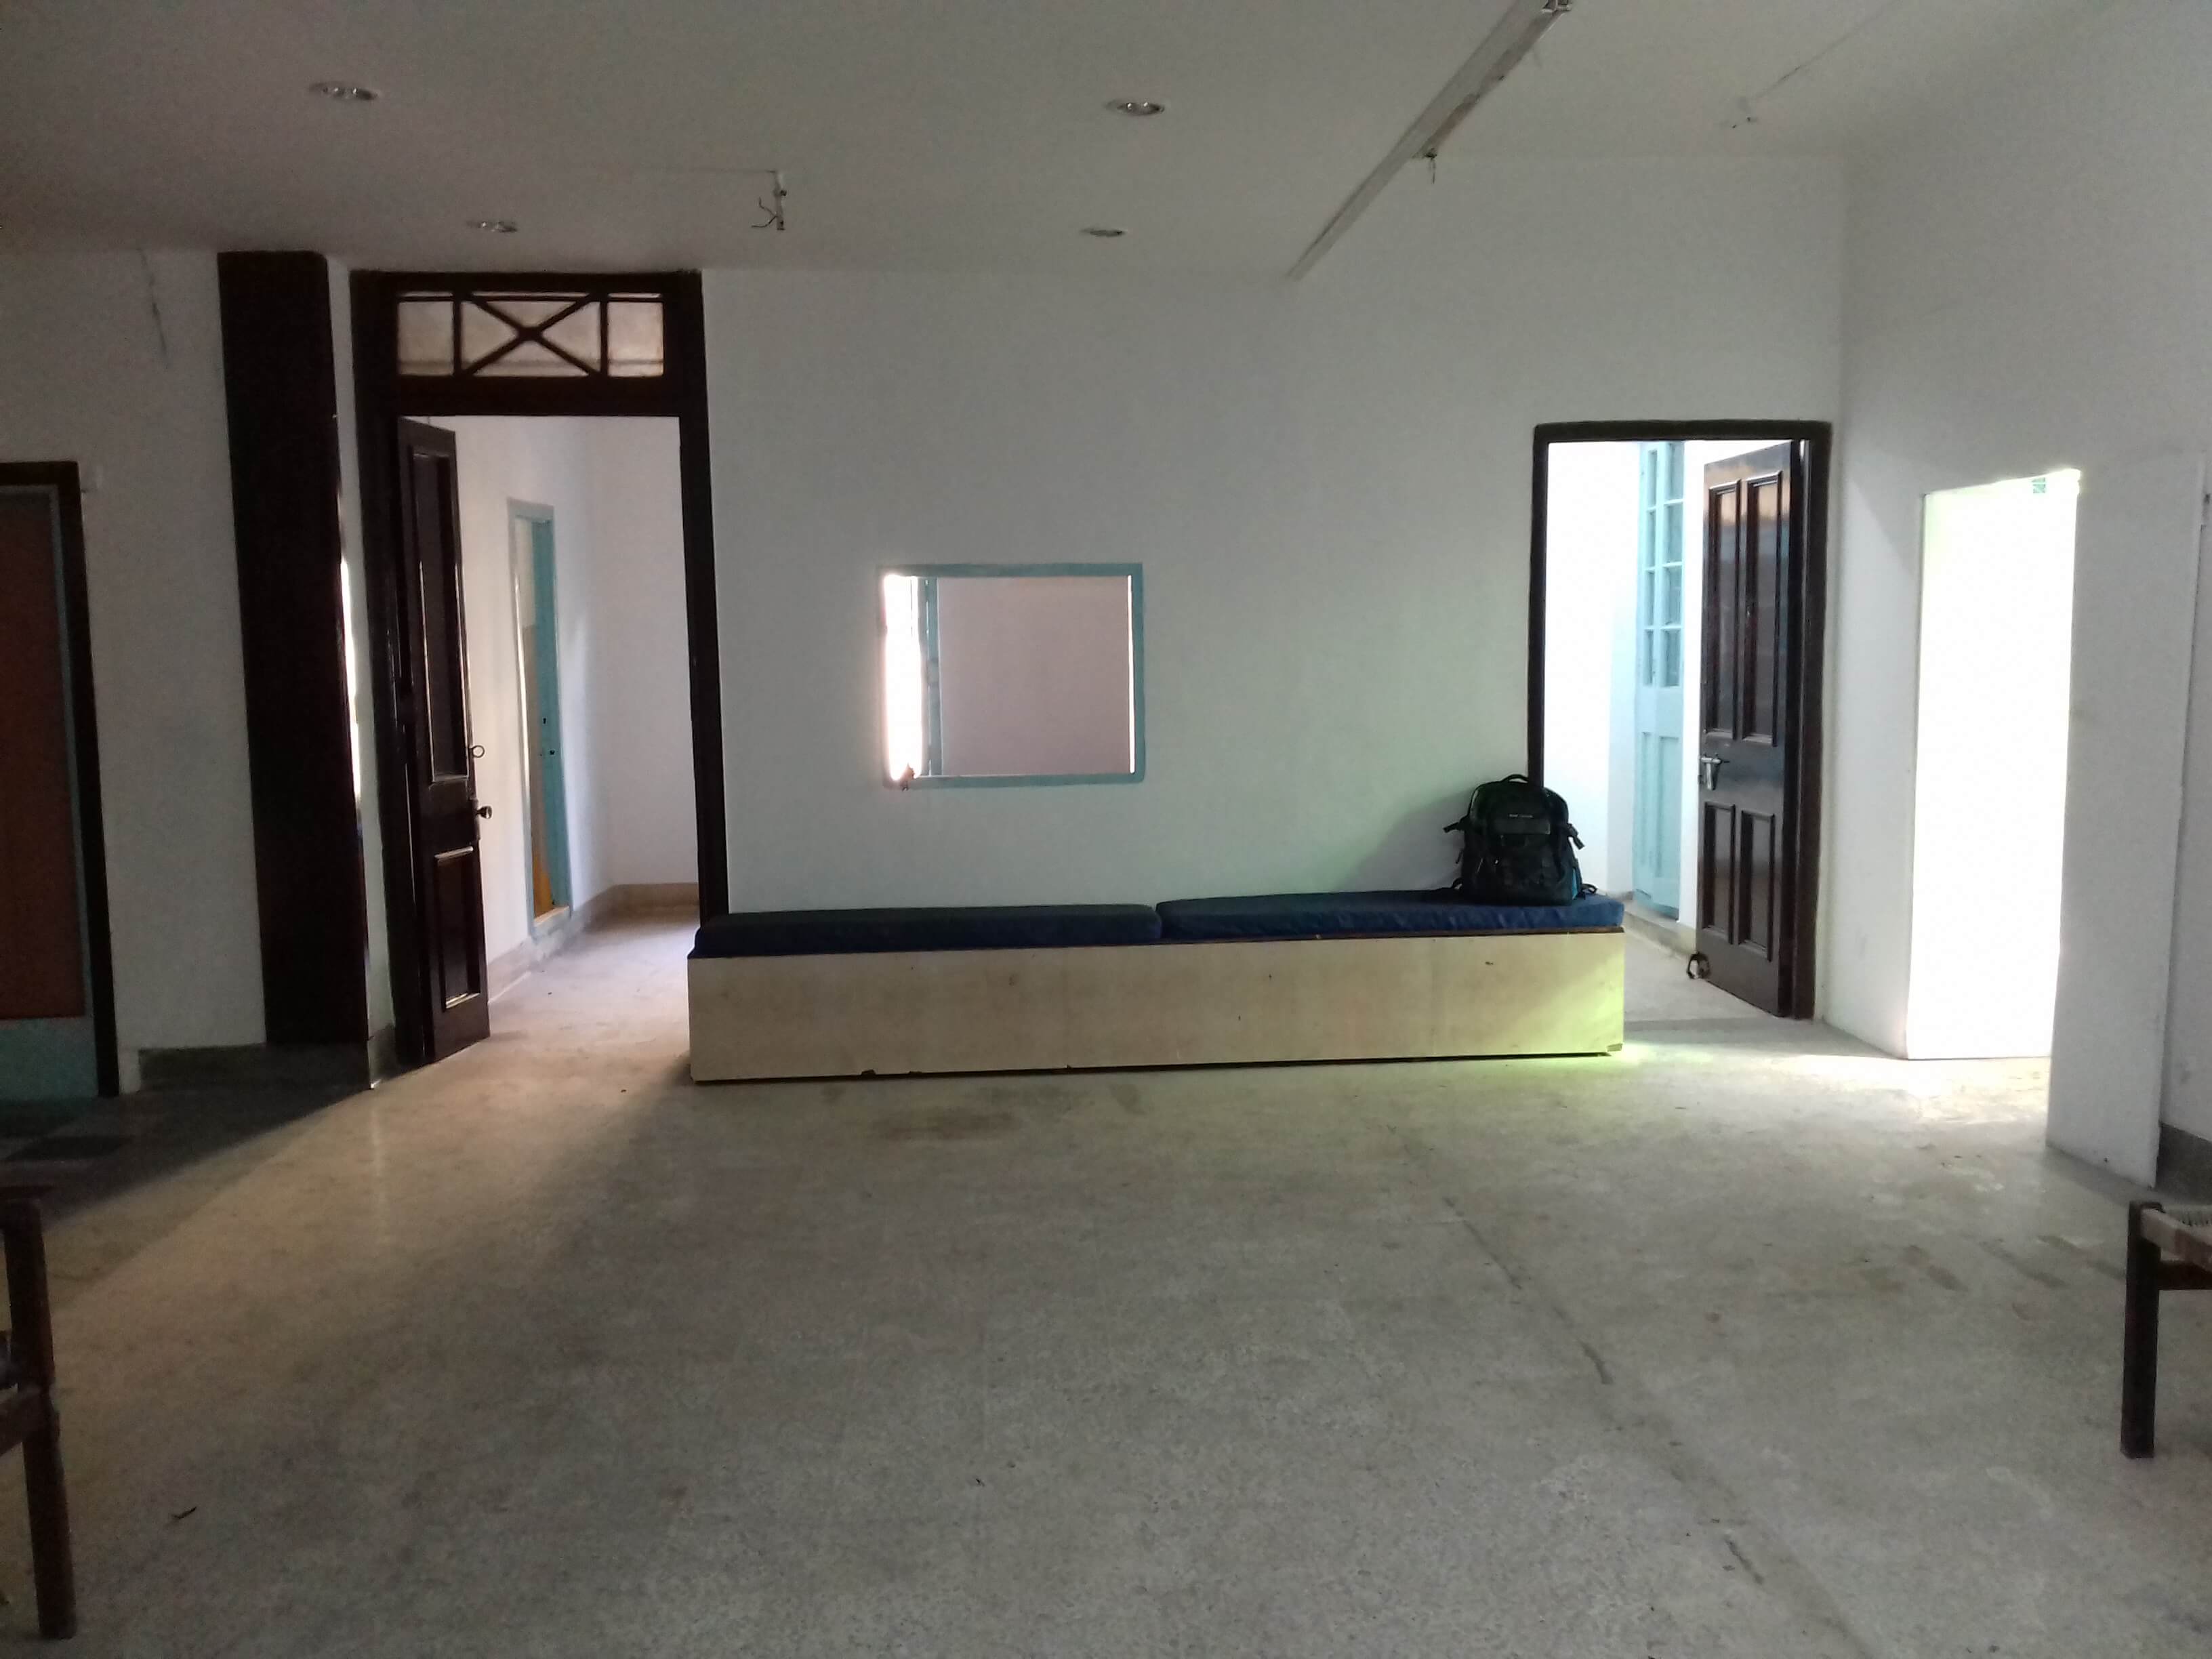 Office For Rent in AJC Bose Road Kolkata (Id: 5510)